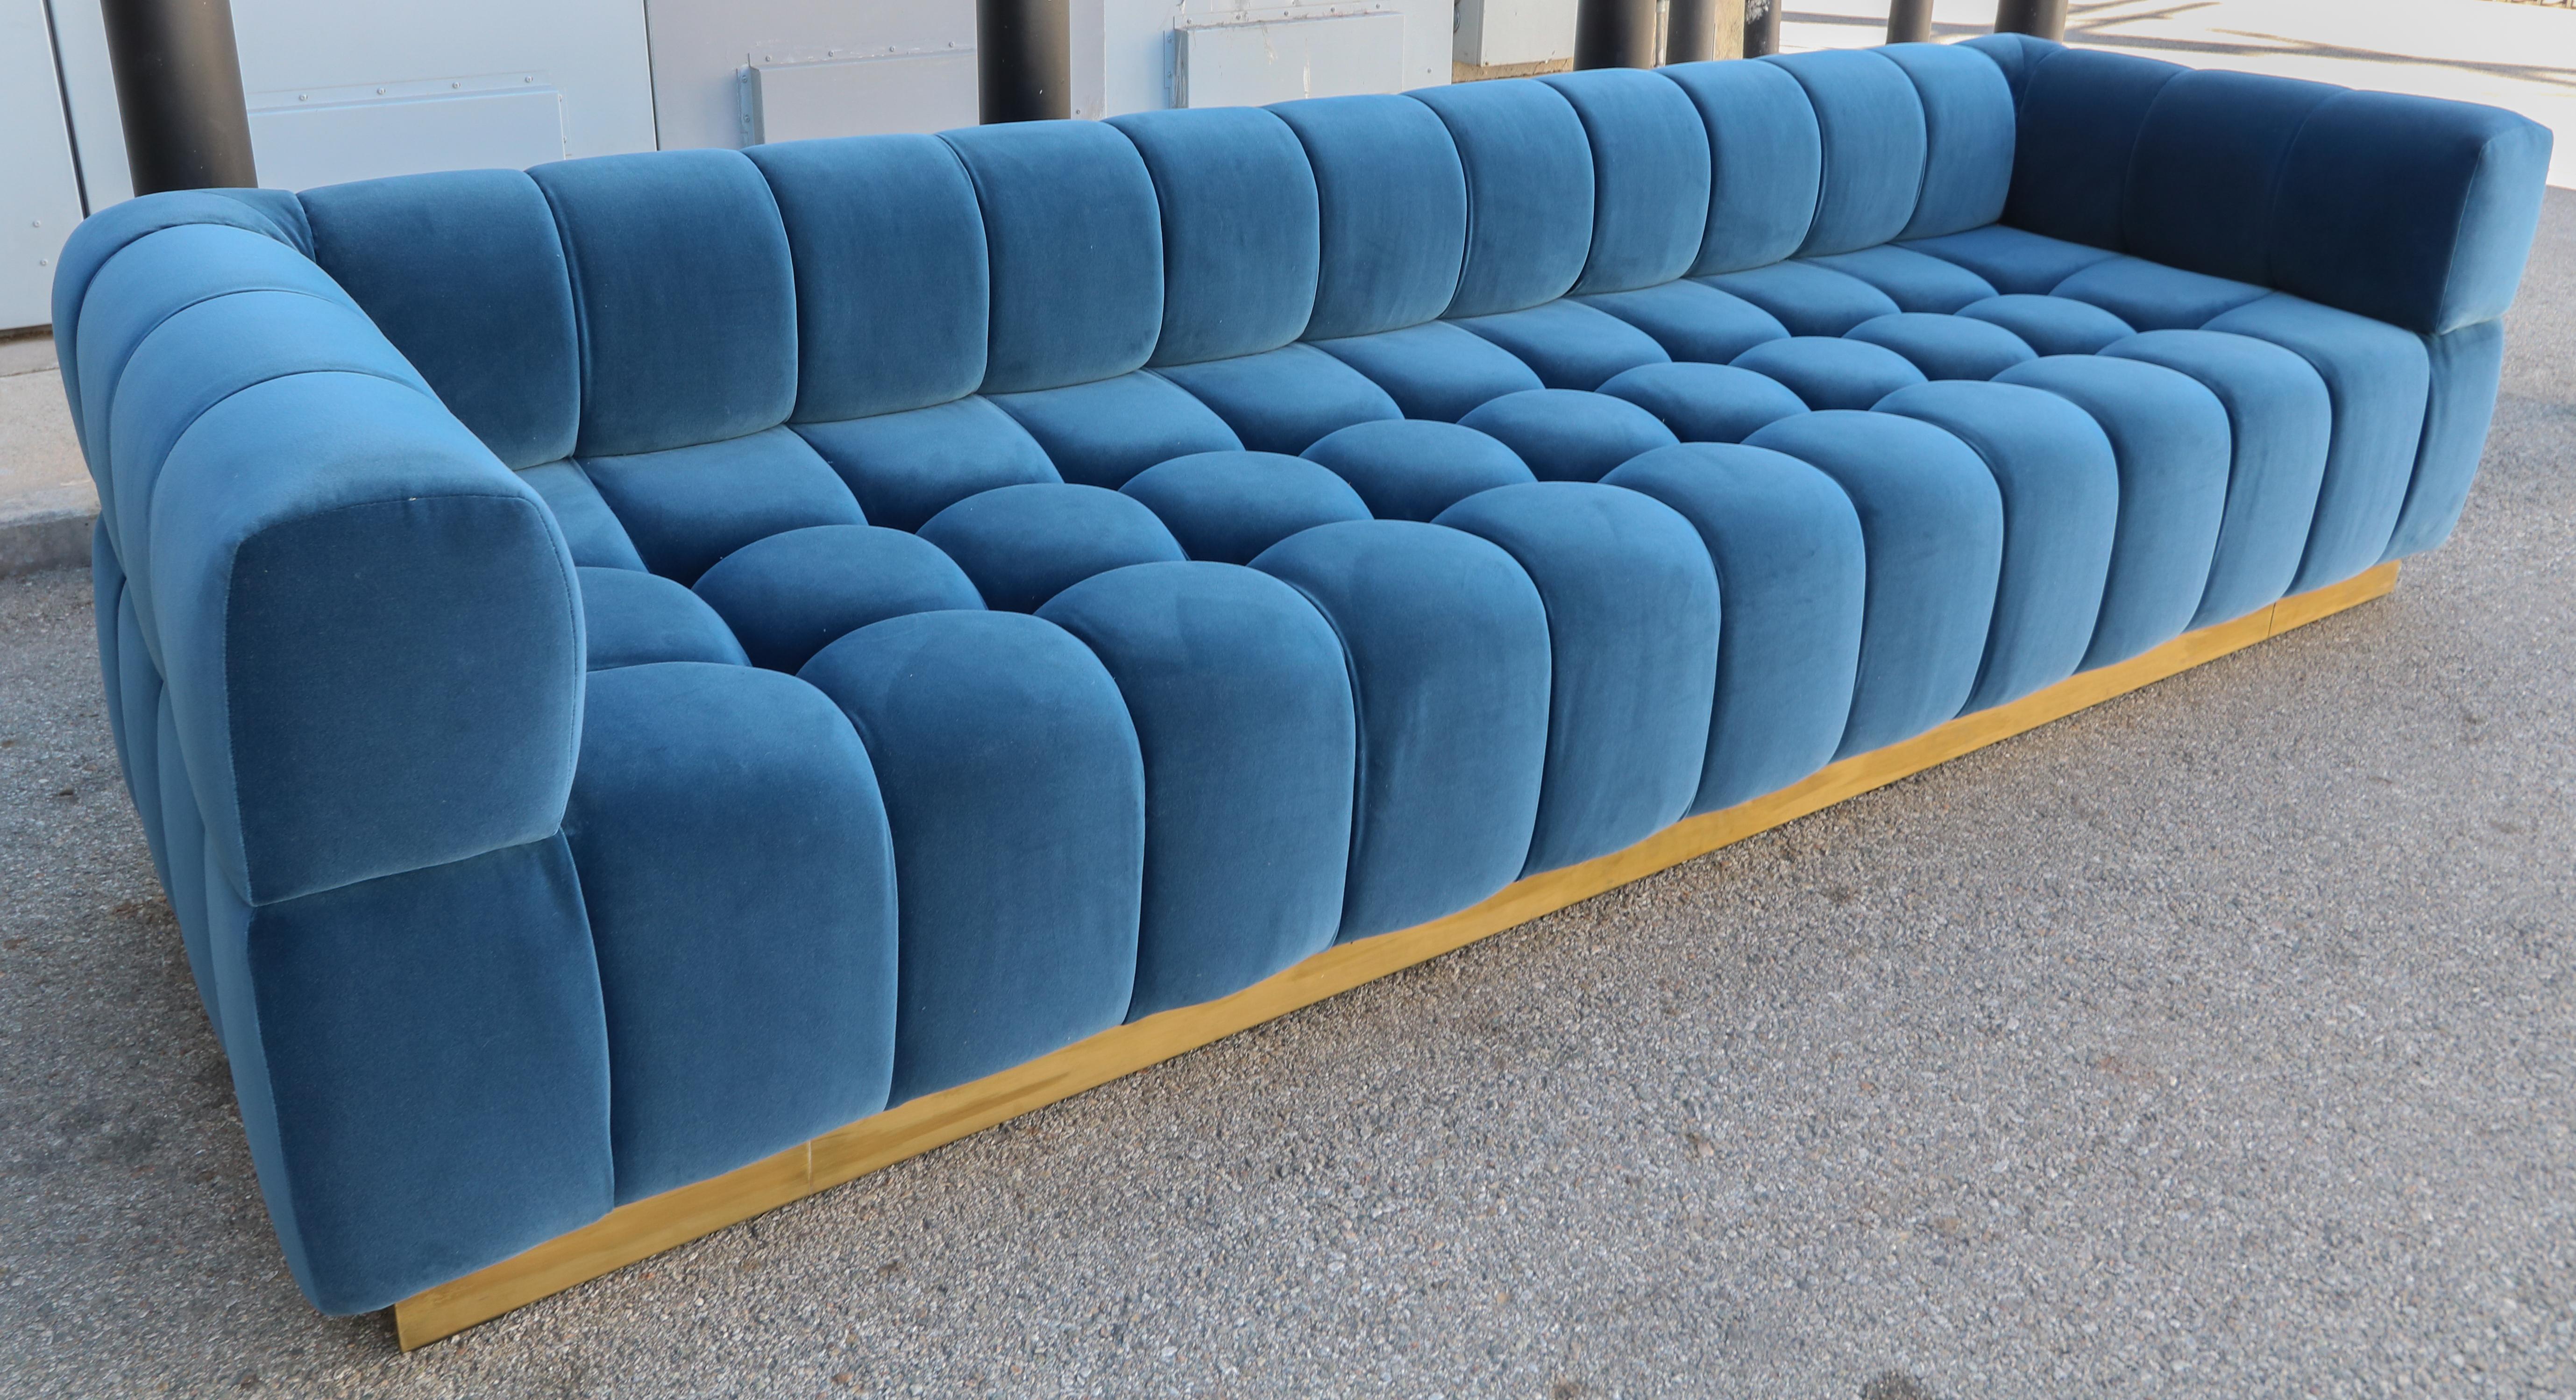 American Custom Tufted Blue Velvet Sofa with Brass Base by Adesso Imports For Sale